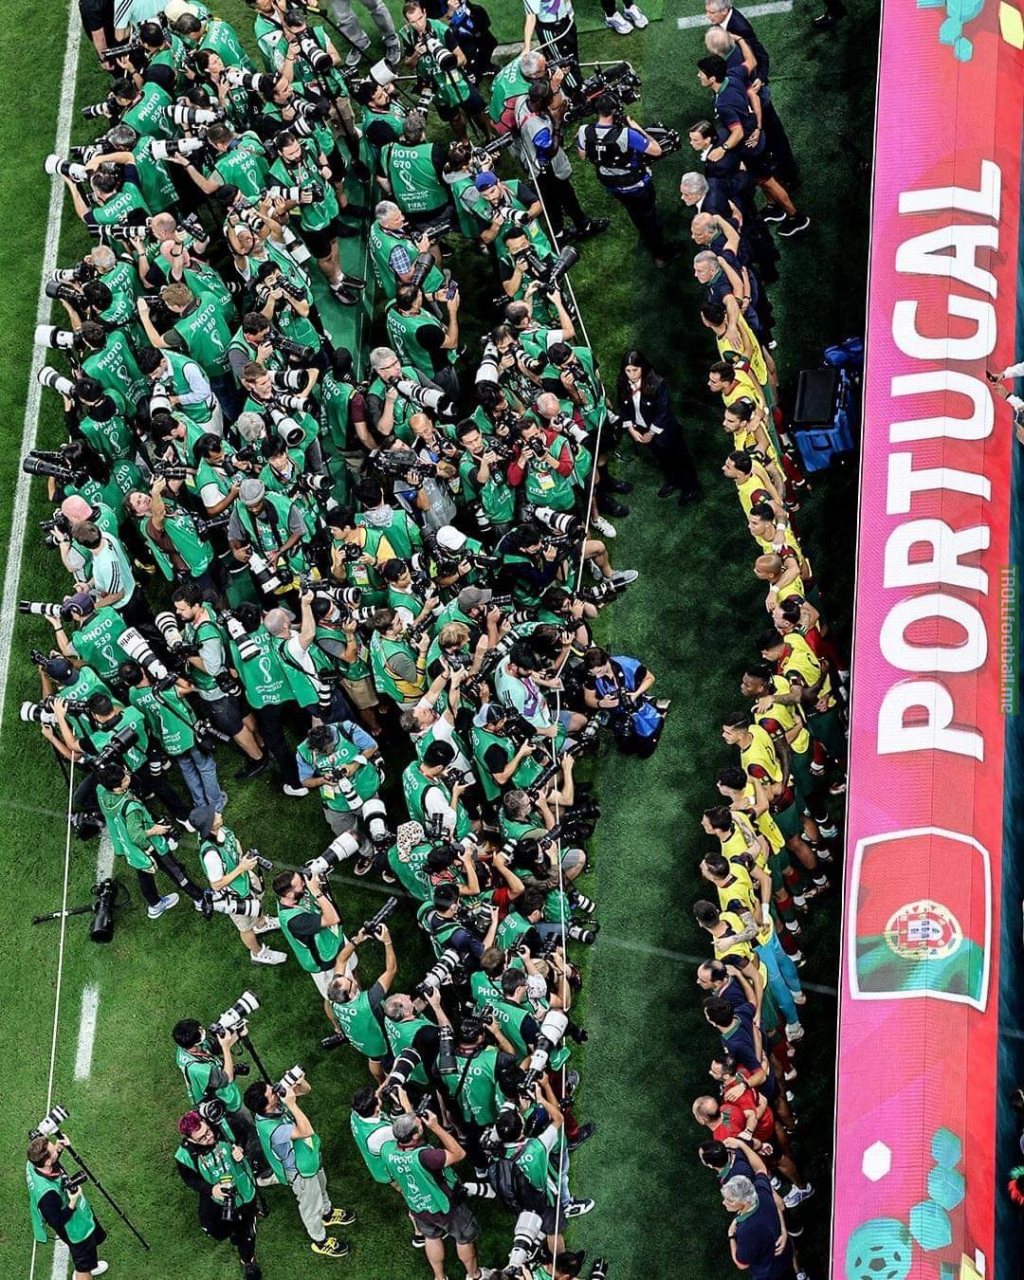 Photographers in front of the Portuguese bench during the anthem in the game against Switzerland.